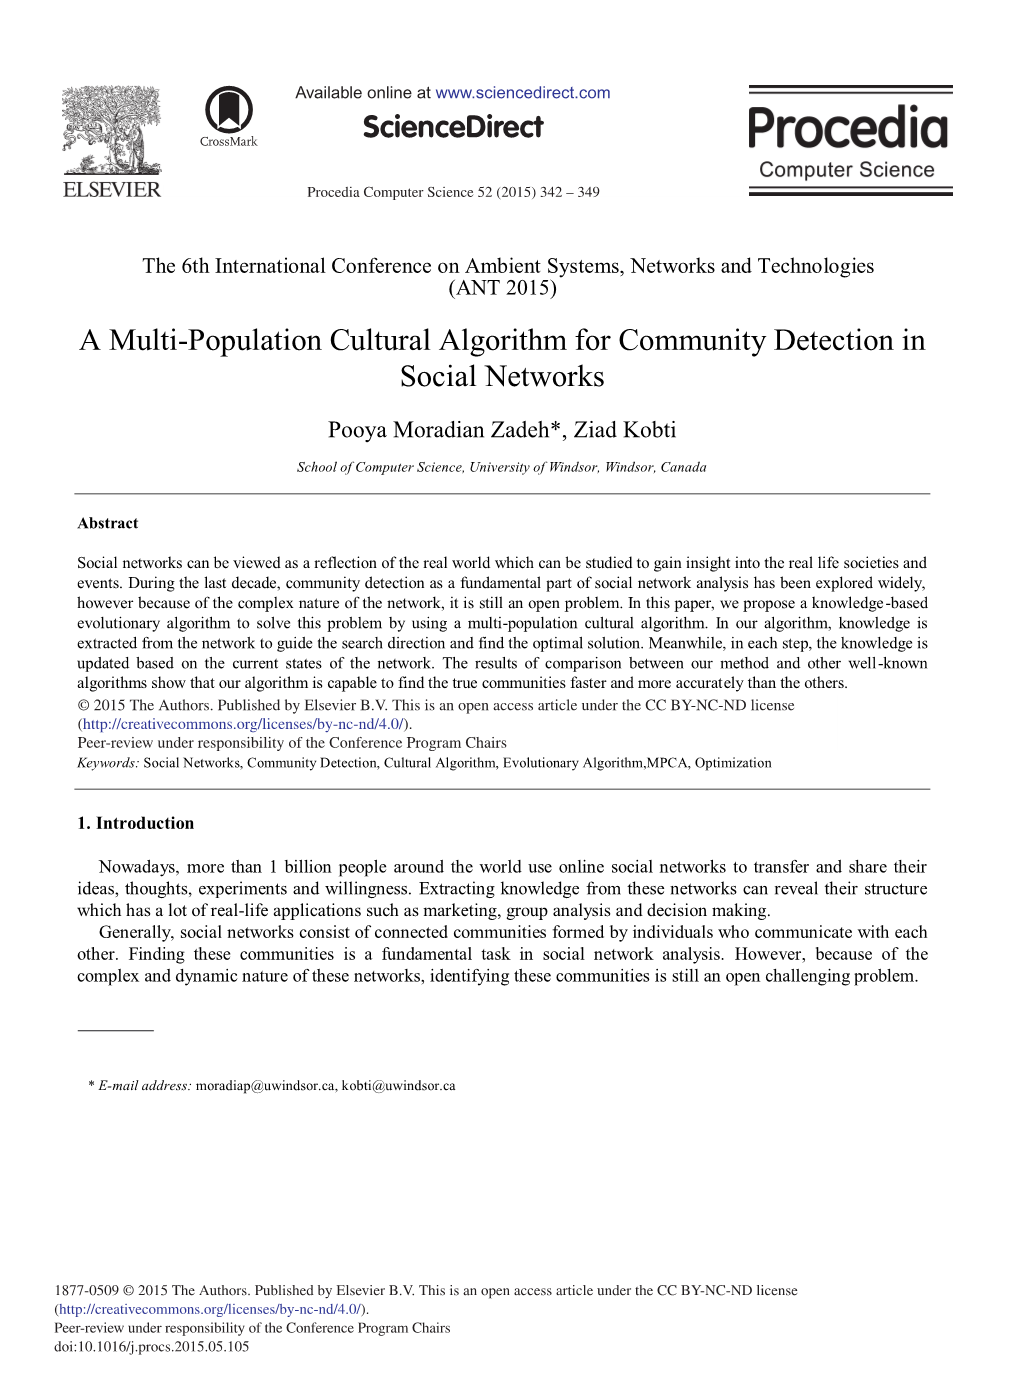 A Multi-Population Cultural Algorithm for Community Detection in Social Networks